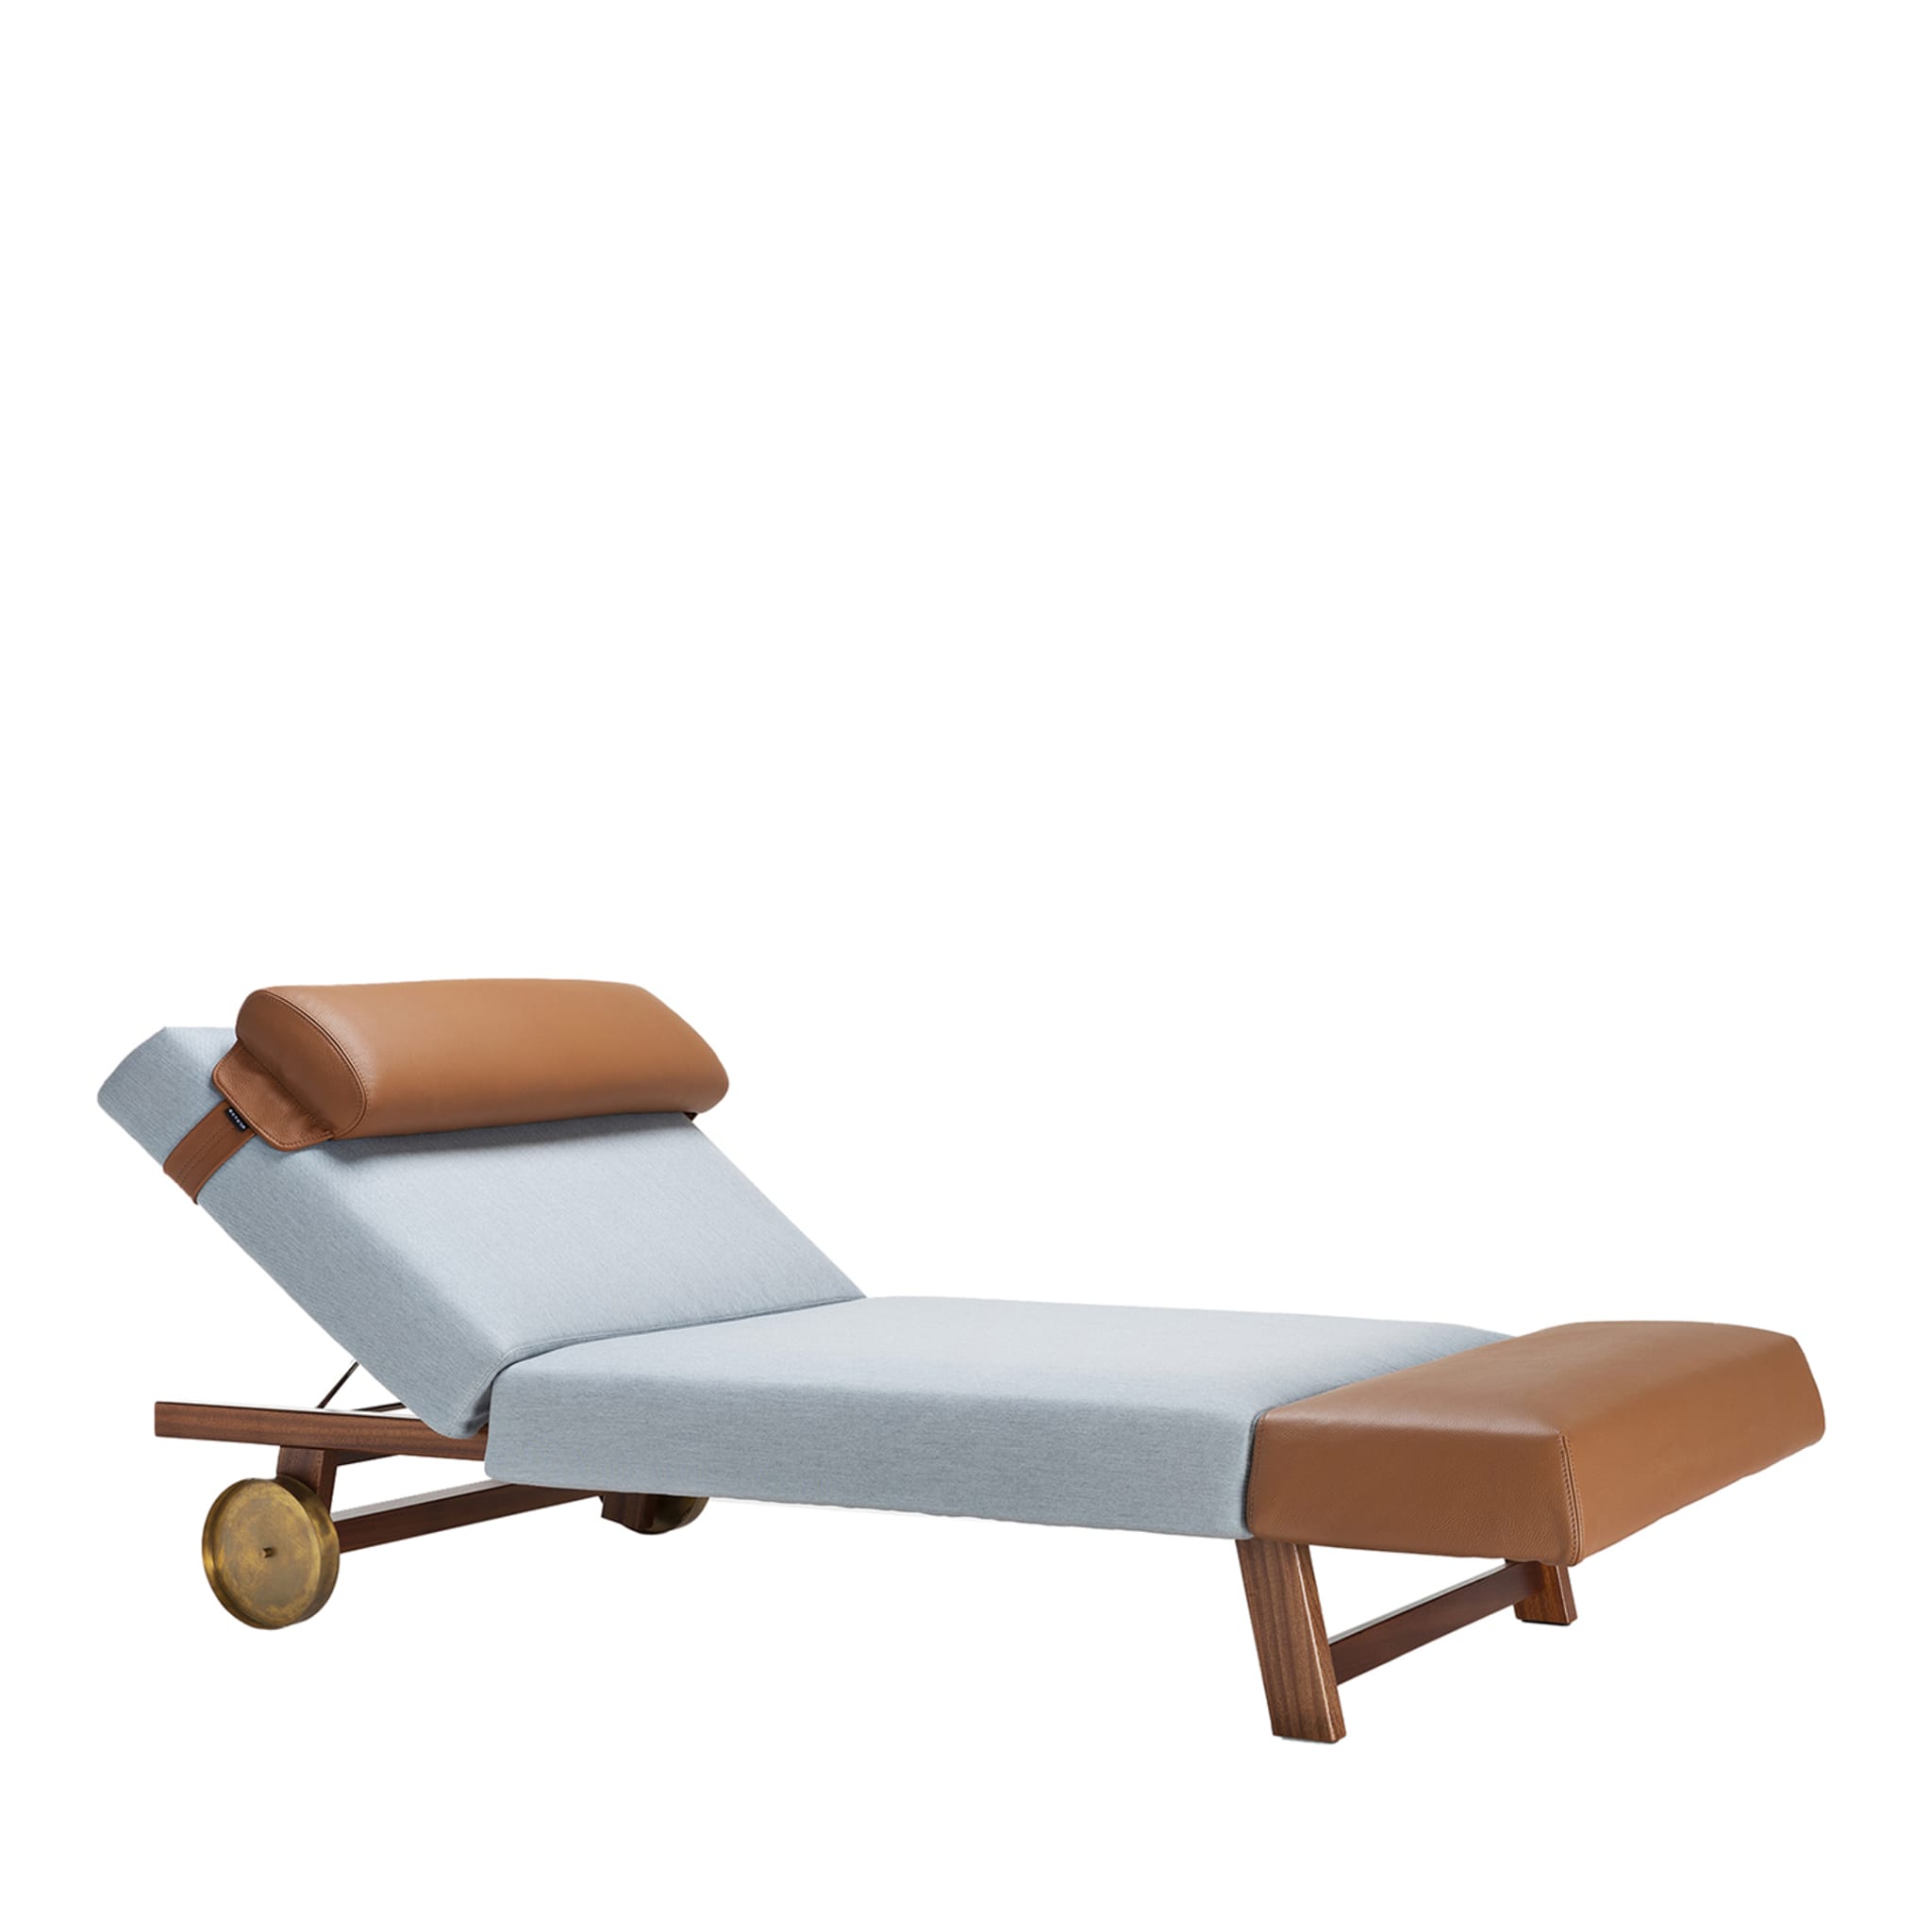 10th Gray Sun Lounger by Massimo Castagna - Main view